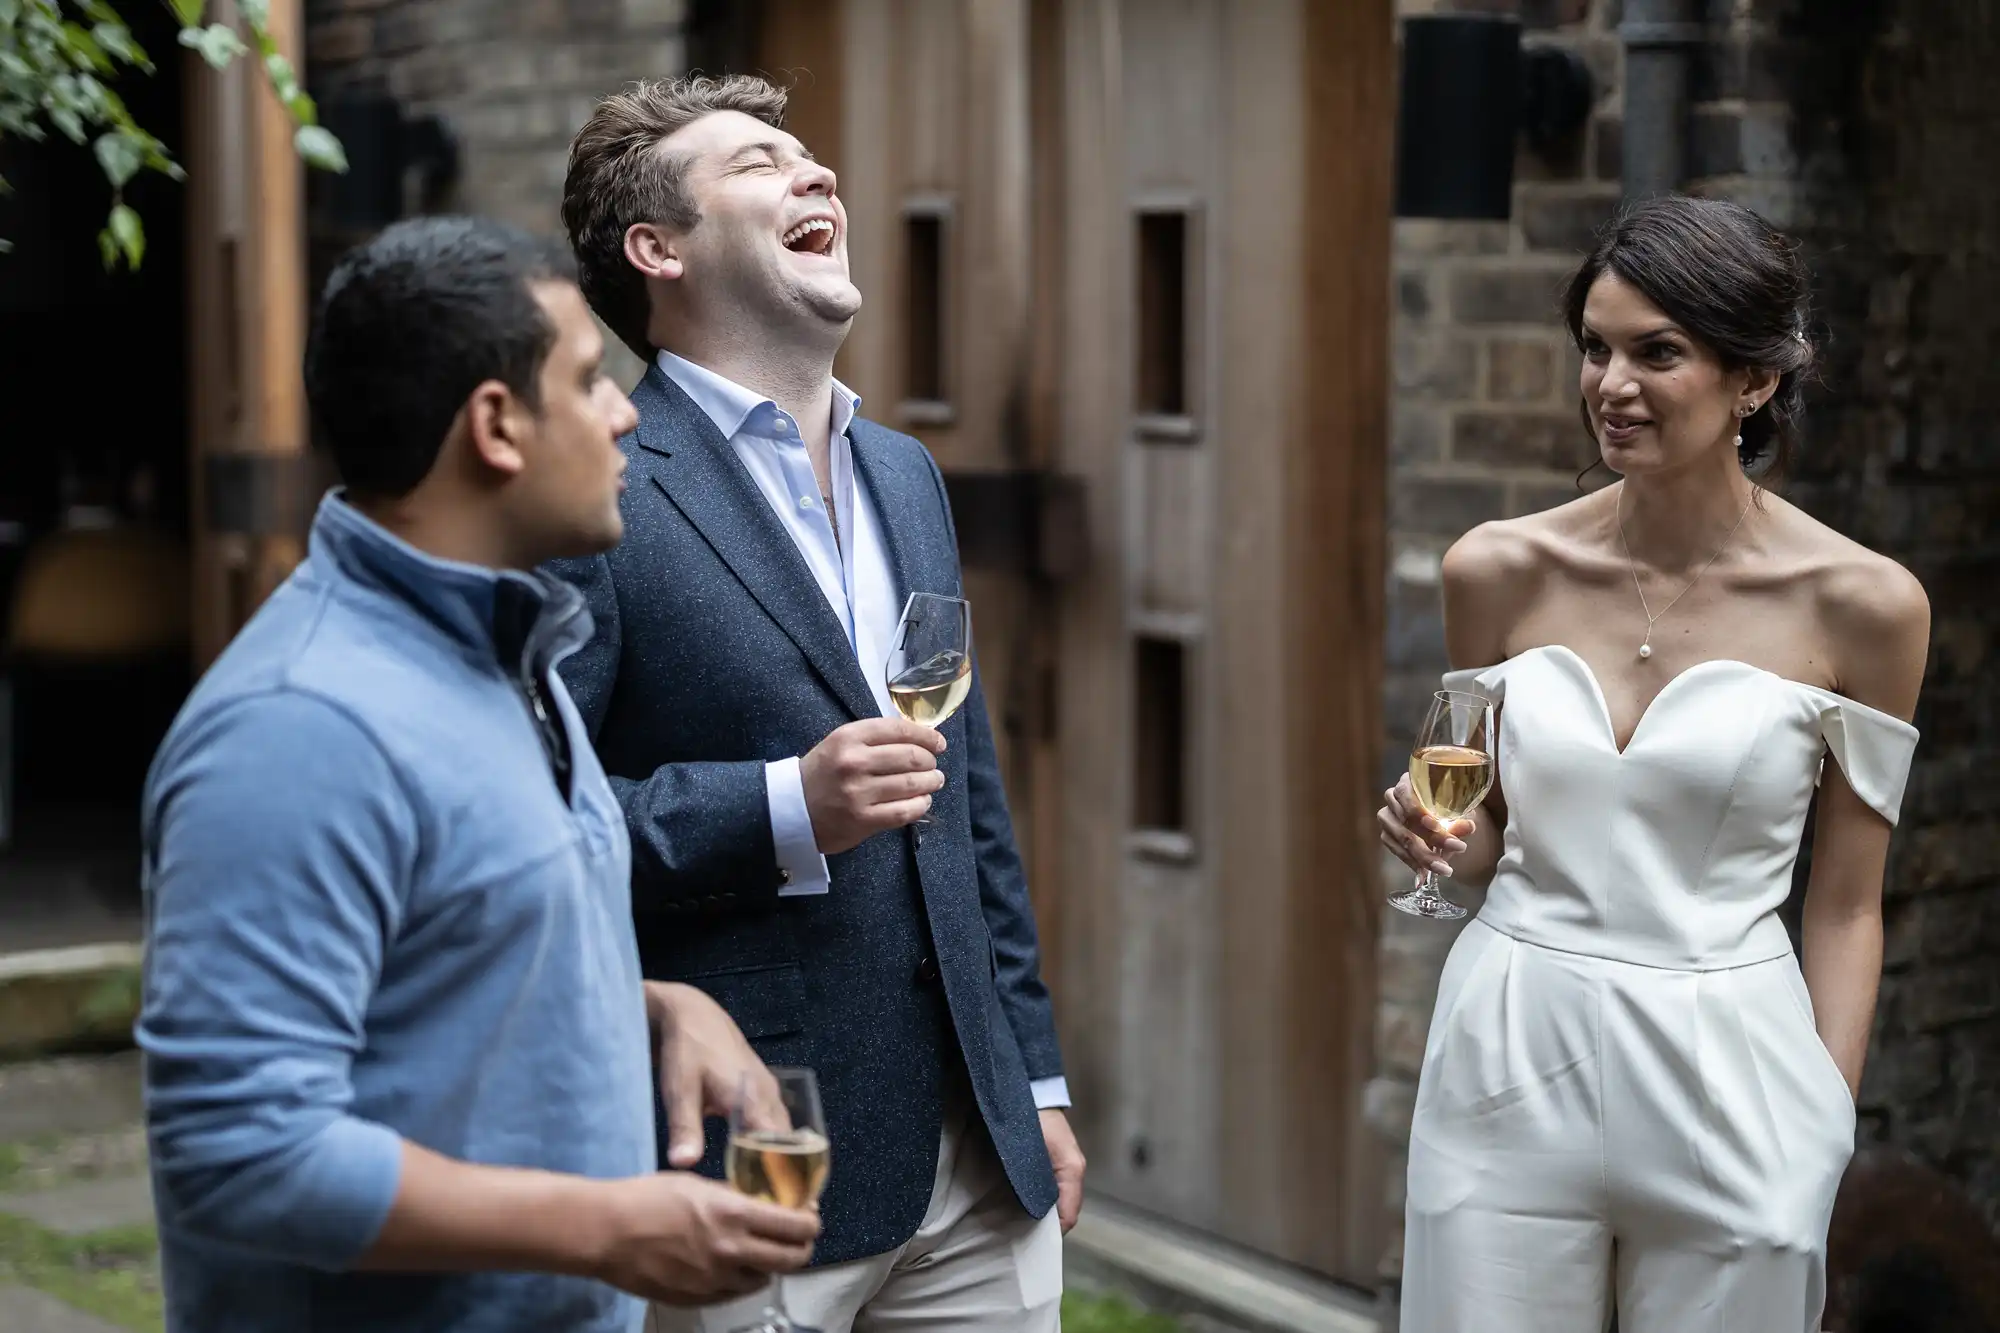 Three people at an outdoor event, laughing and holding glasses of drinks; one man in a casual shirt and jeans, another in a suit, and a woman in a white dress.